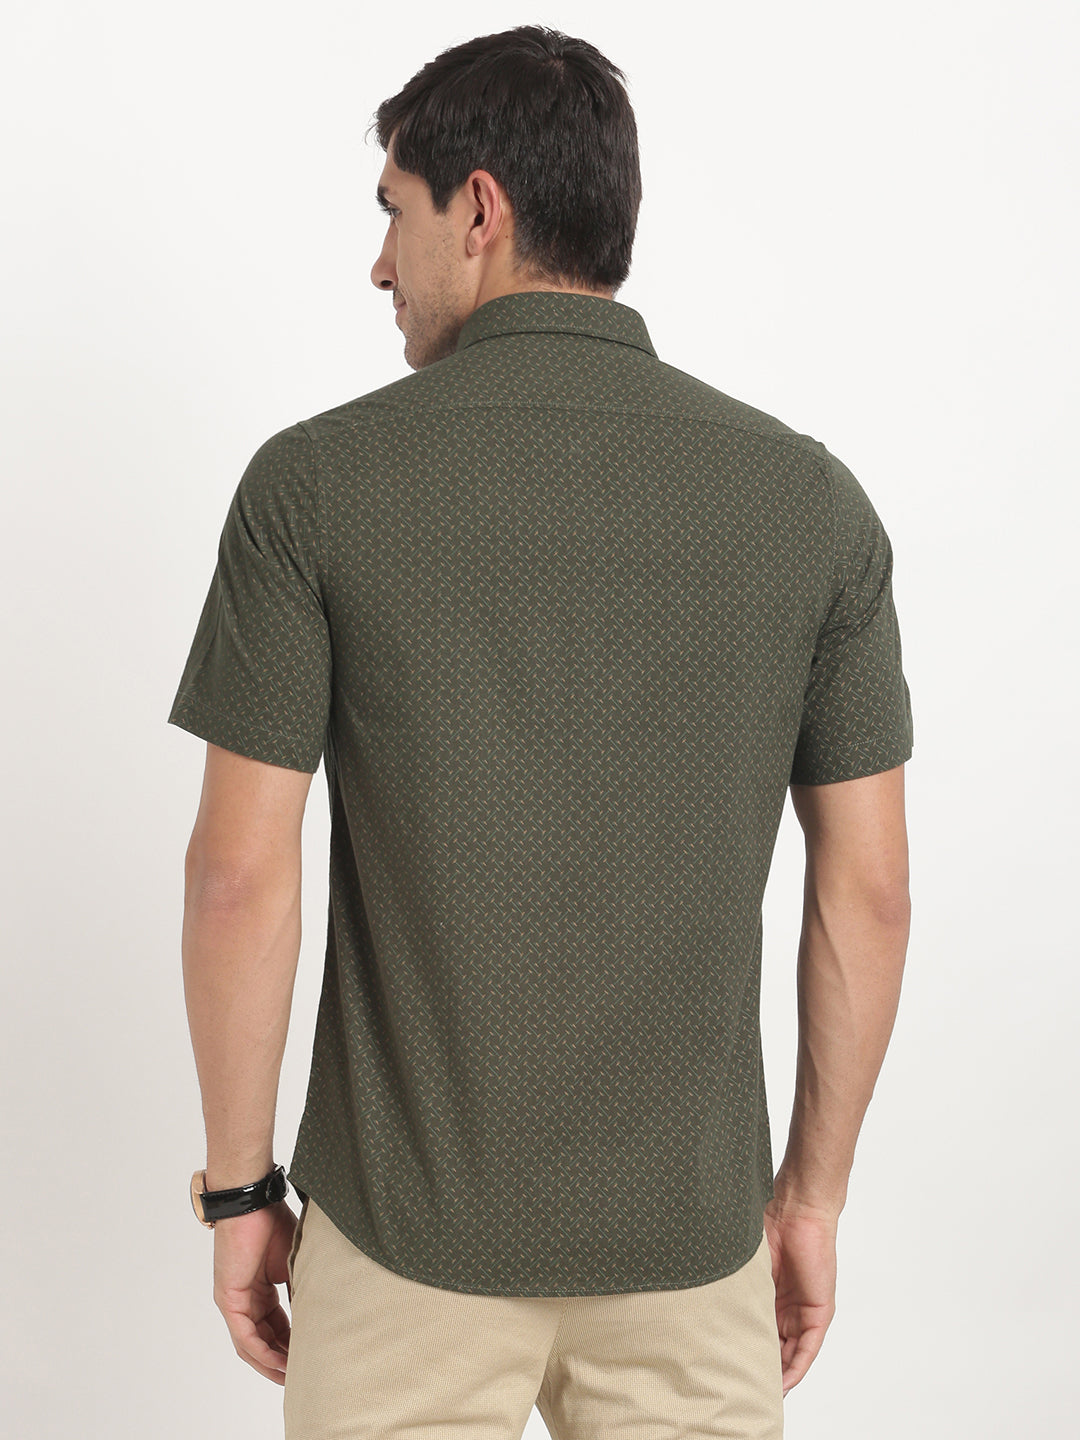 100% Cotton Olive Printed Slim Fit Half Sleeve Casual Shirt